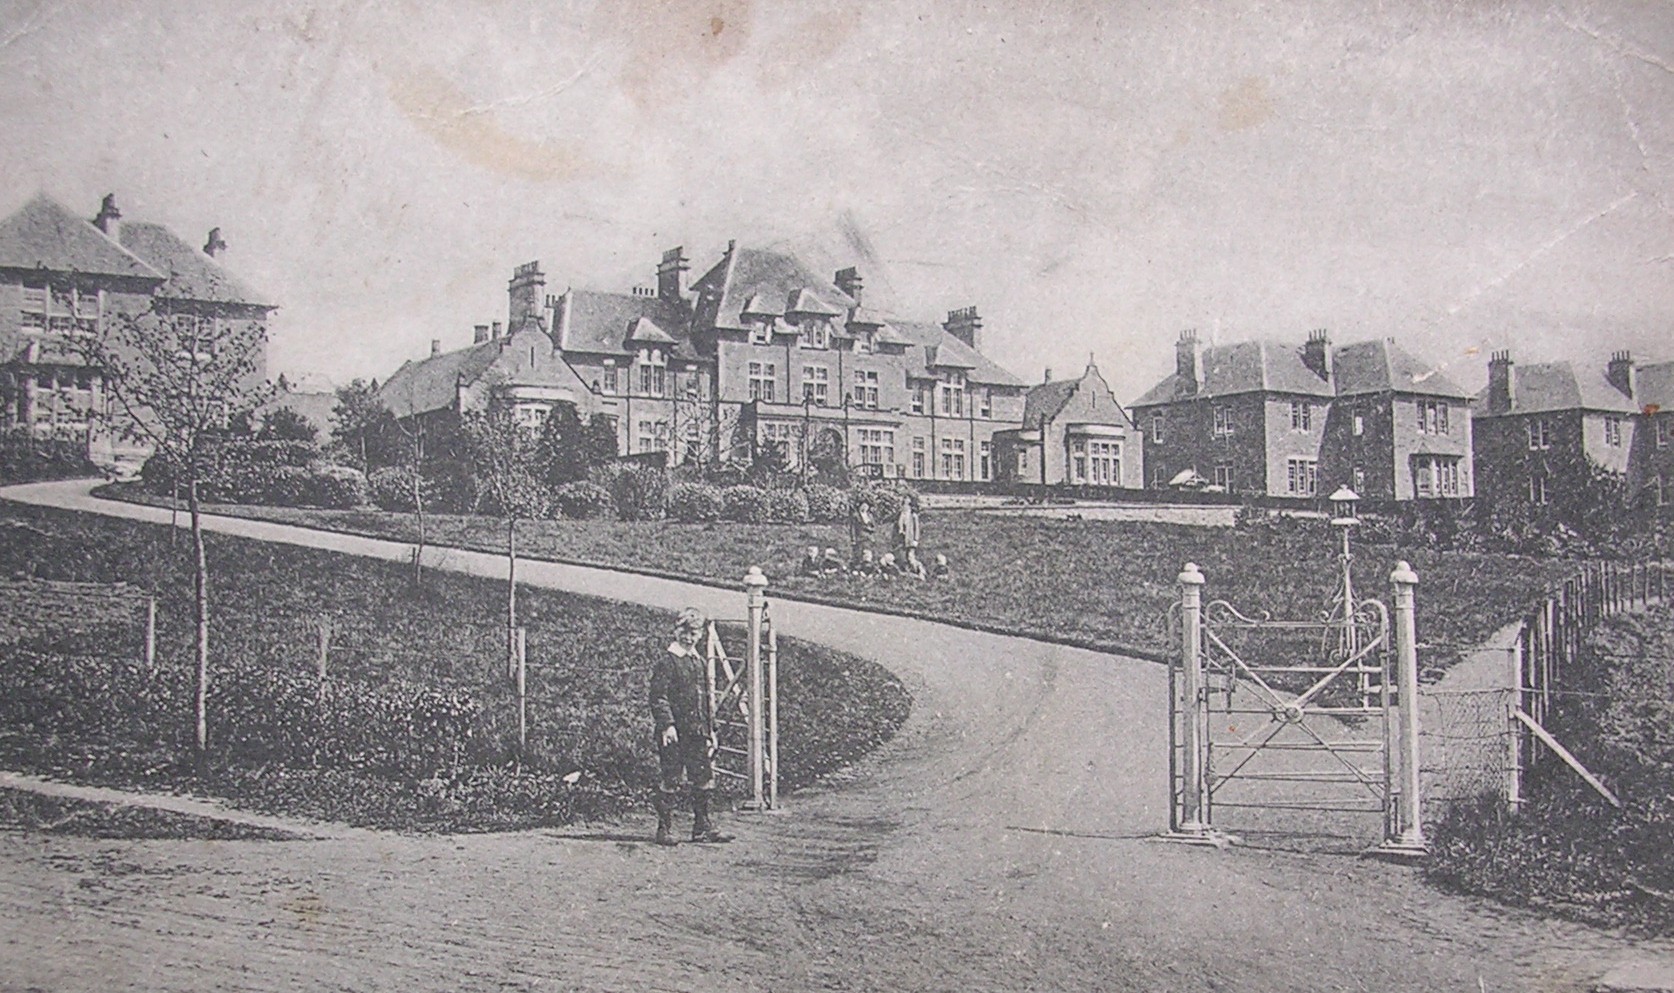 The Strathmartine Hospital building as it was in 1852.